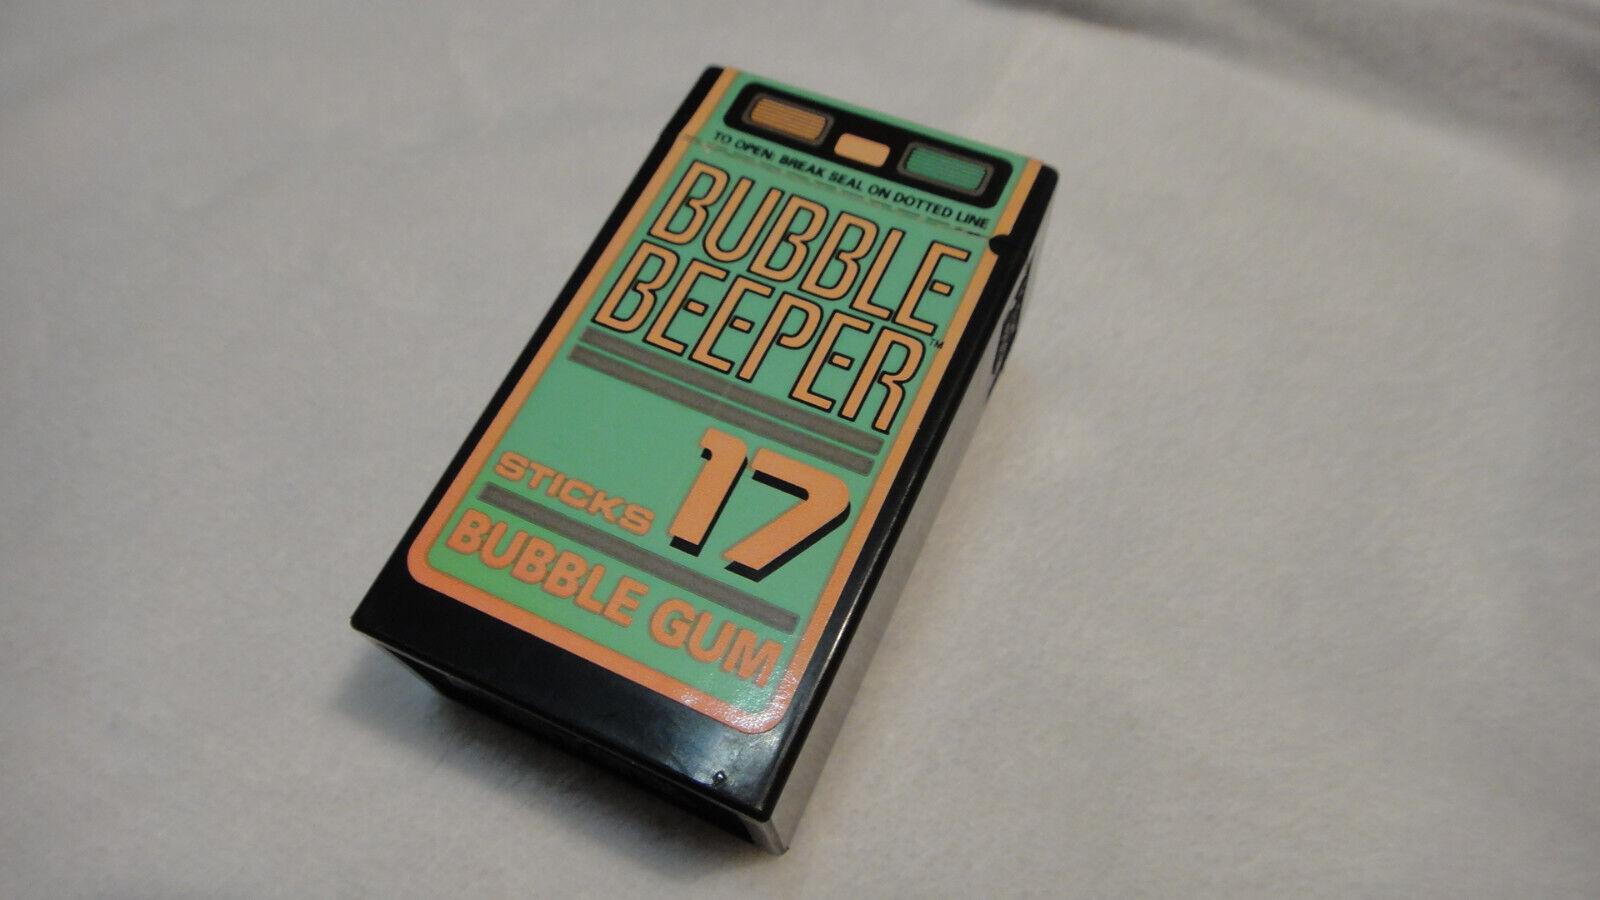 New Vintage Pink Green 80s 90s Bubble Beeper FULL Container Bubble Gum Amurol